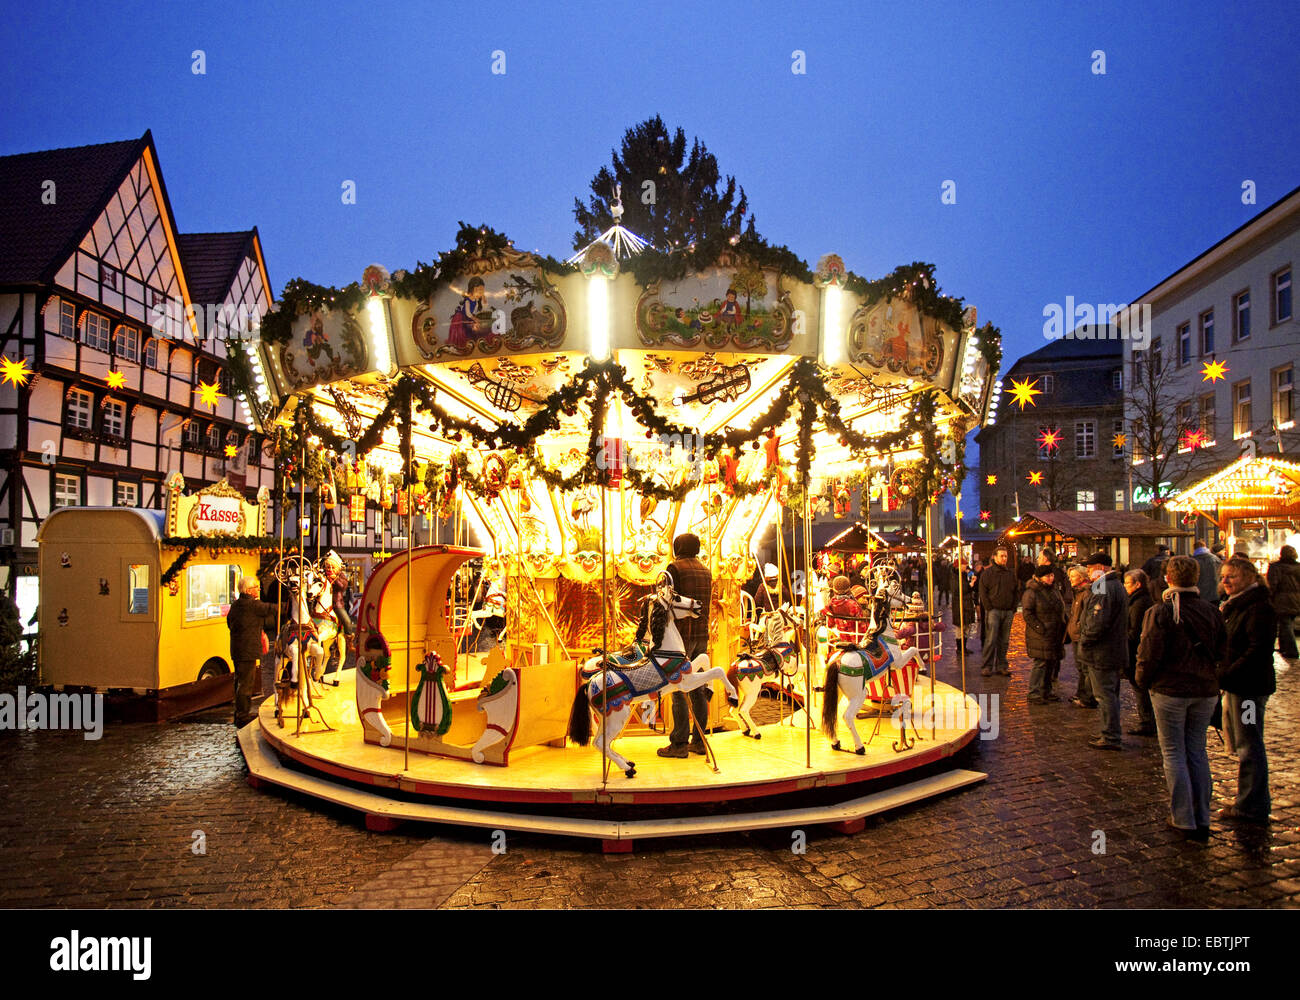 merry-go-round on the Christmas market in the old city of Soest, Germany, North Rhine-Westphalia, Soest Stock Photo